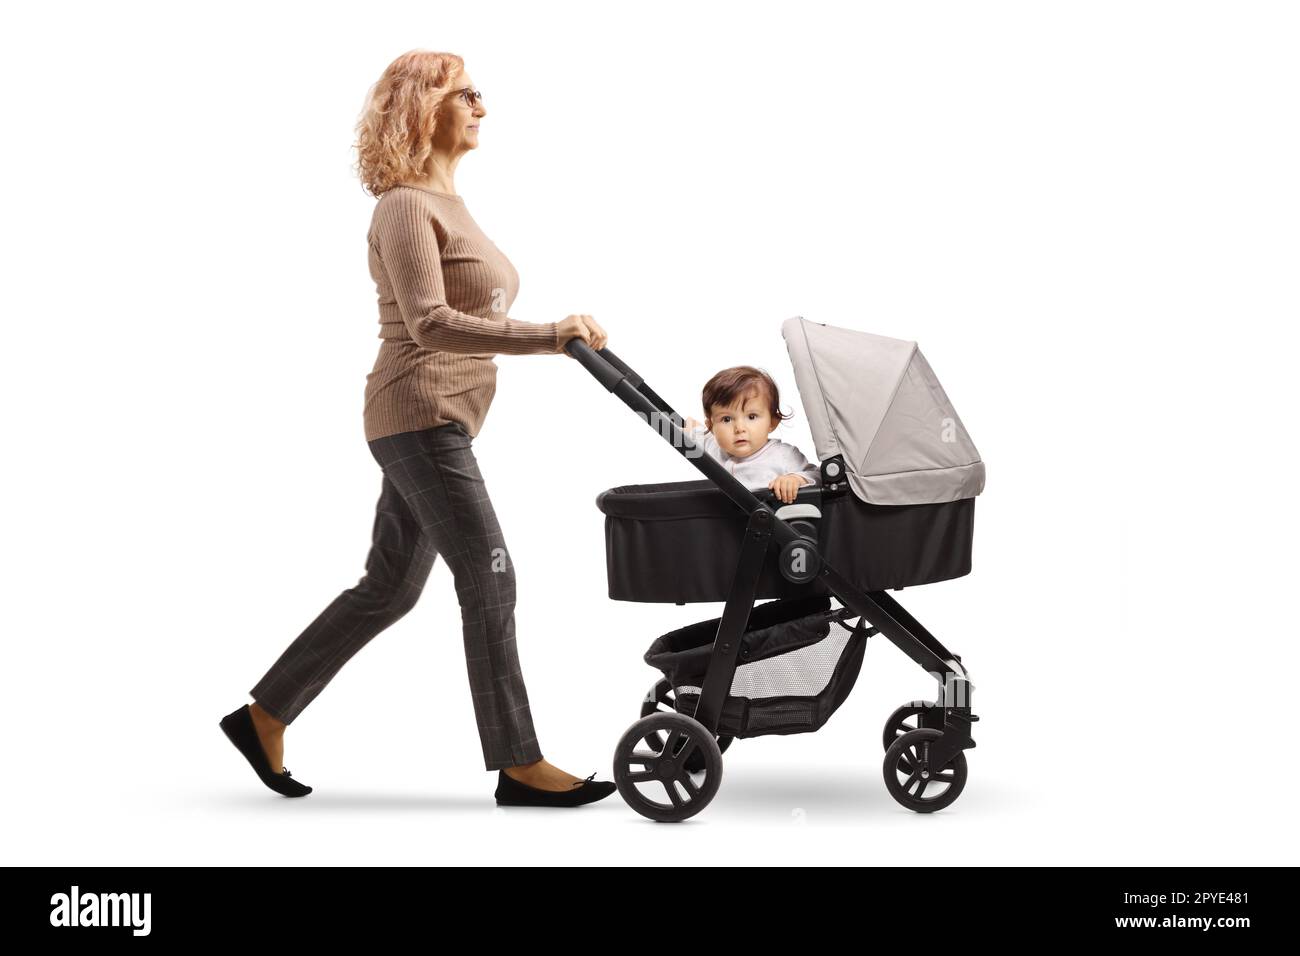 Full length profile shot of a mature woman pushing a baby in a stroller isolated on white background Stock Photo